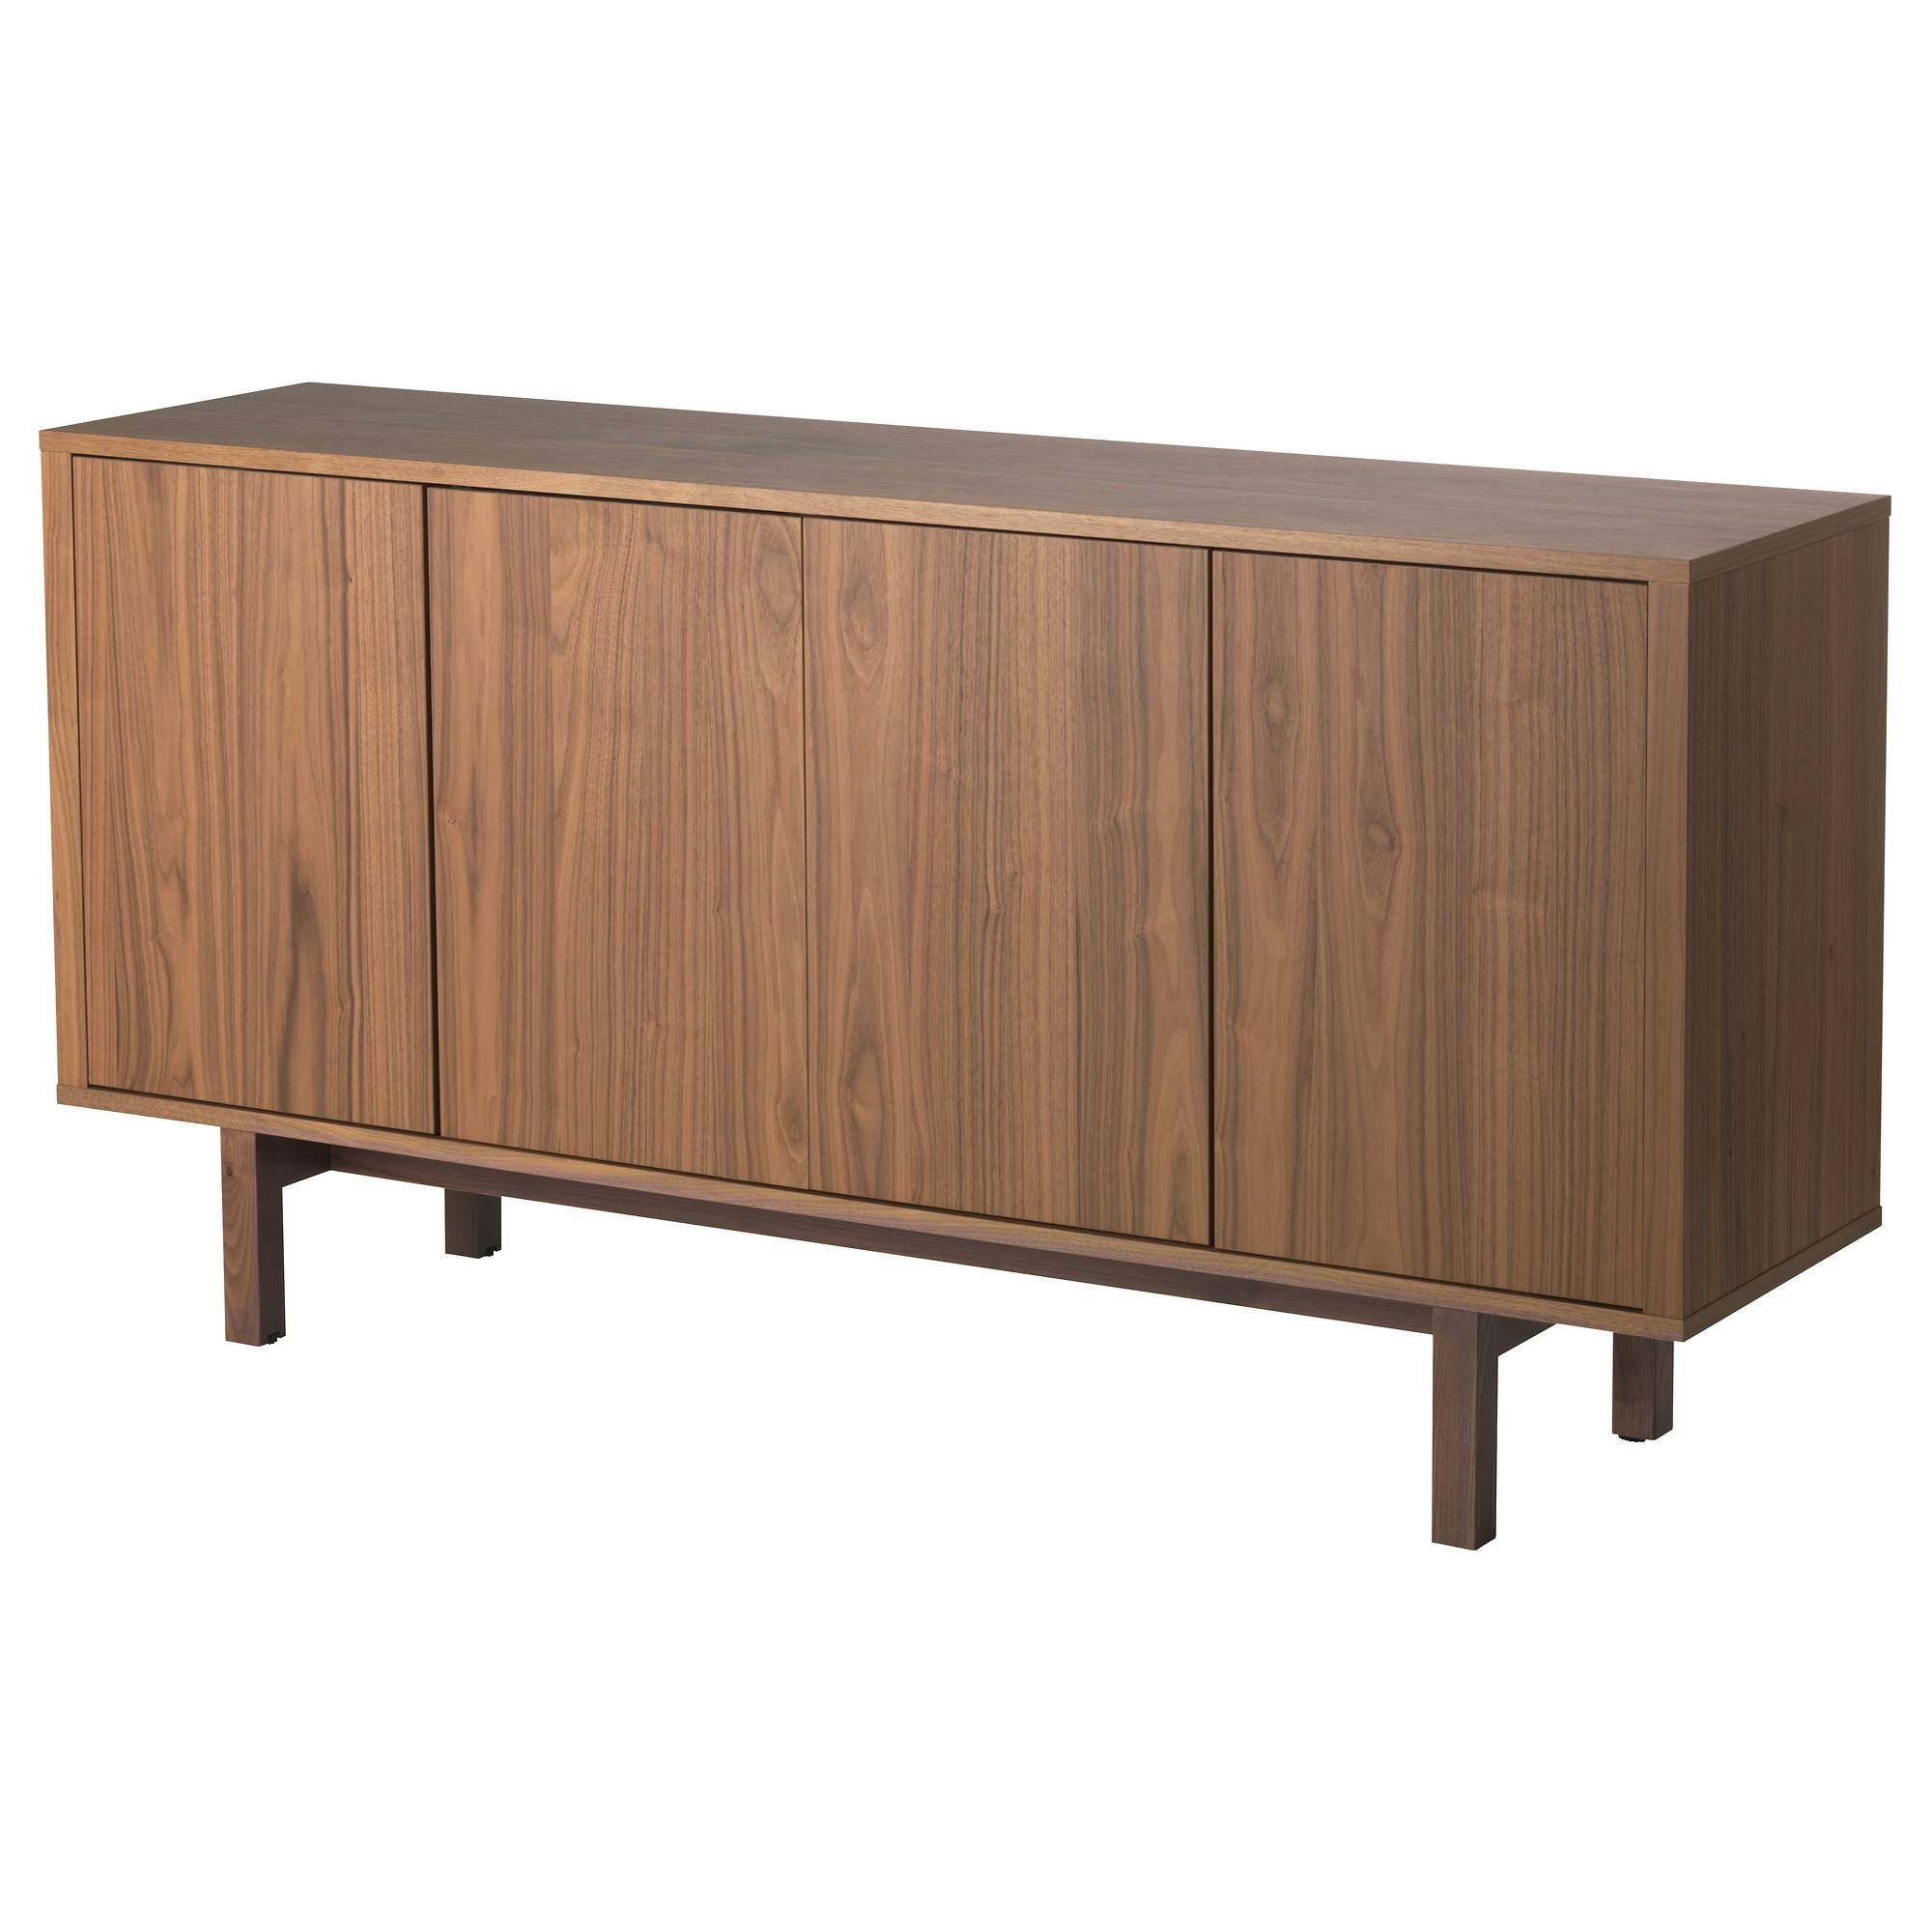 Stockholm Sideboard – Ikea Inside Most Up To Date Walnut Sideboards (View 3 of 15)